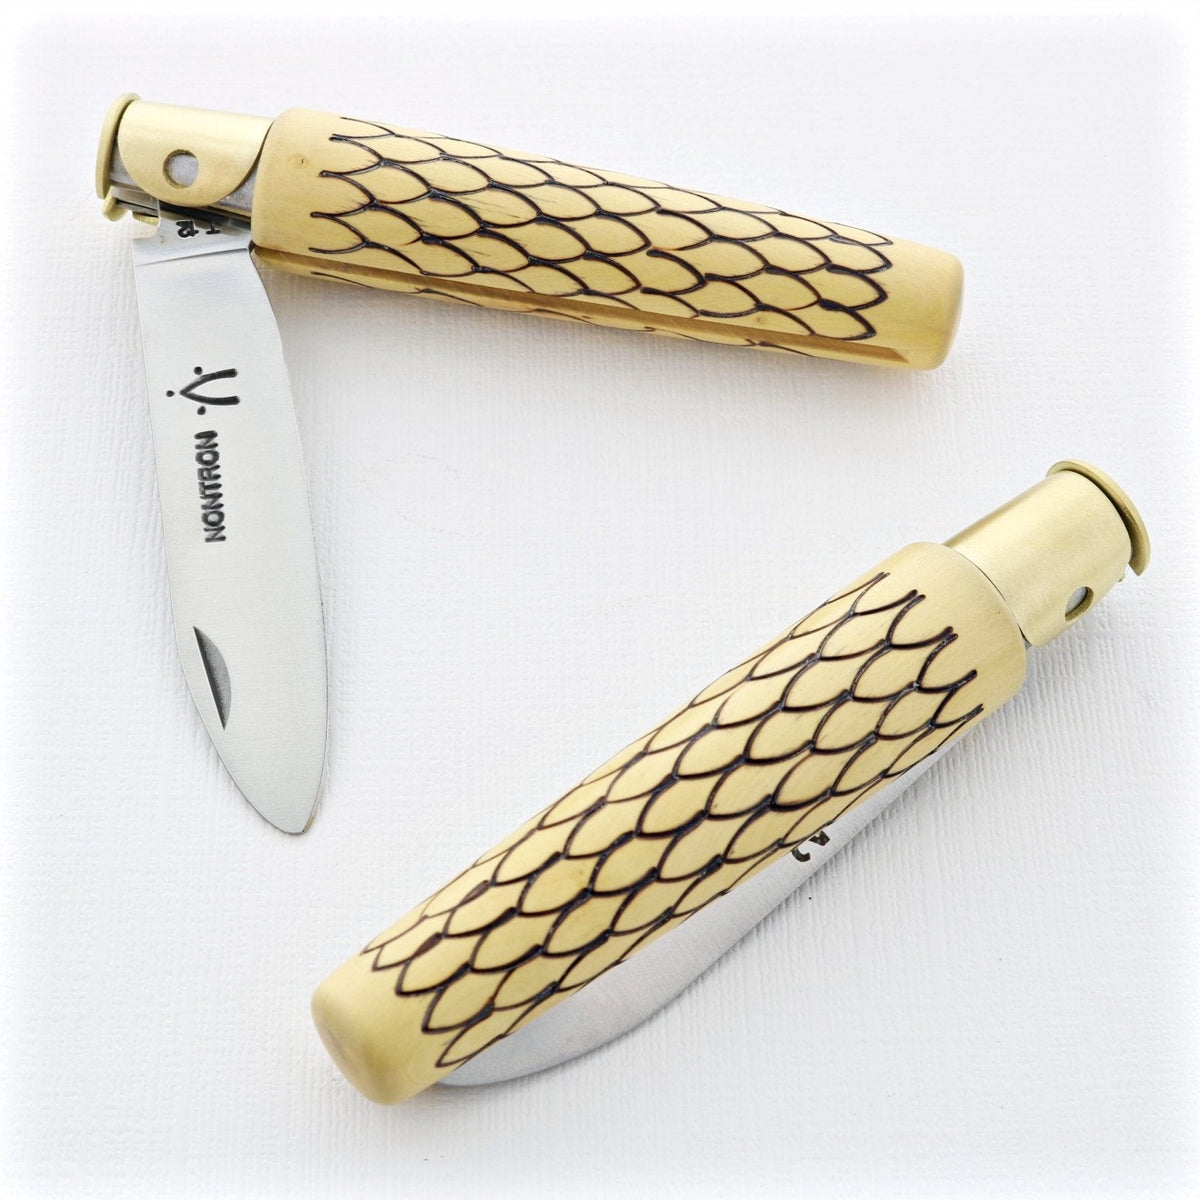 Nontron Pocket Knife No22 Feathered Petit Duc - Junior